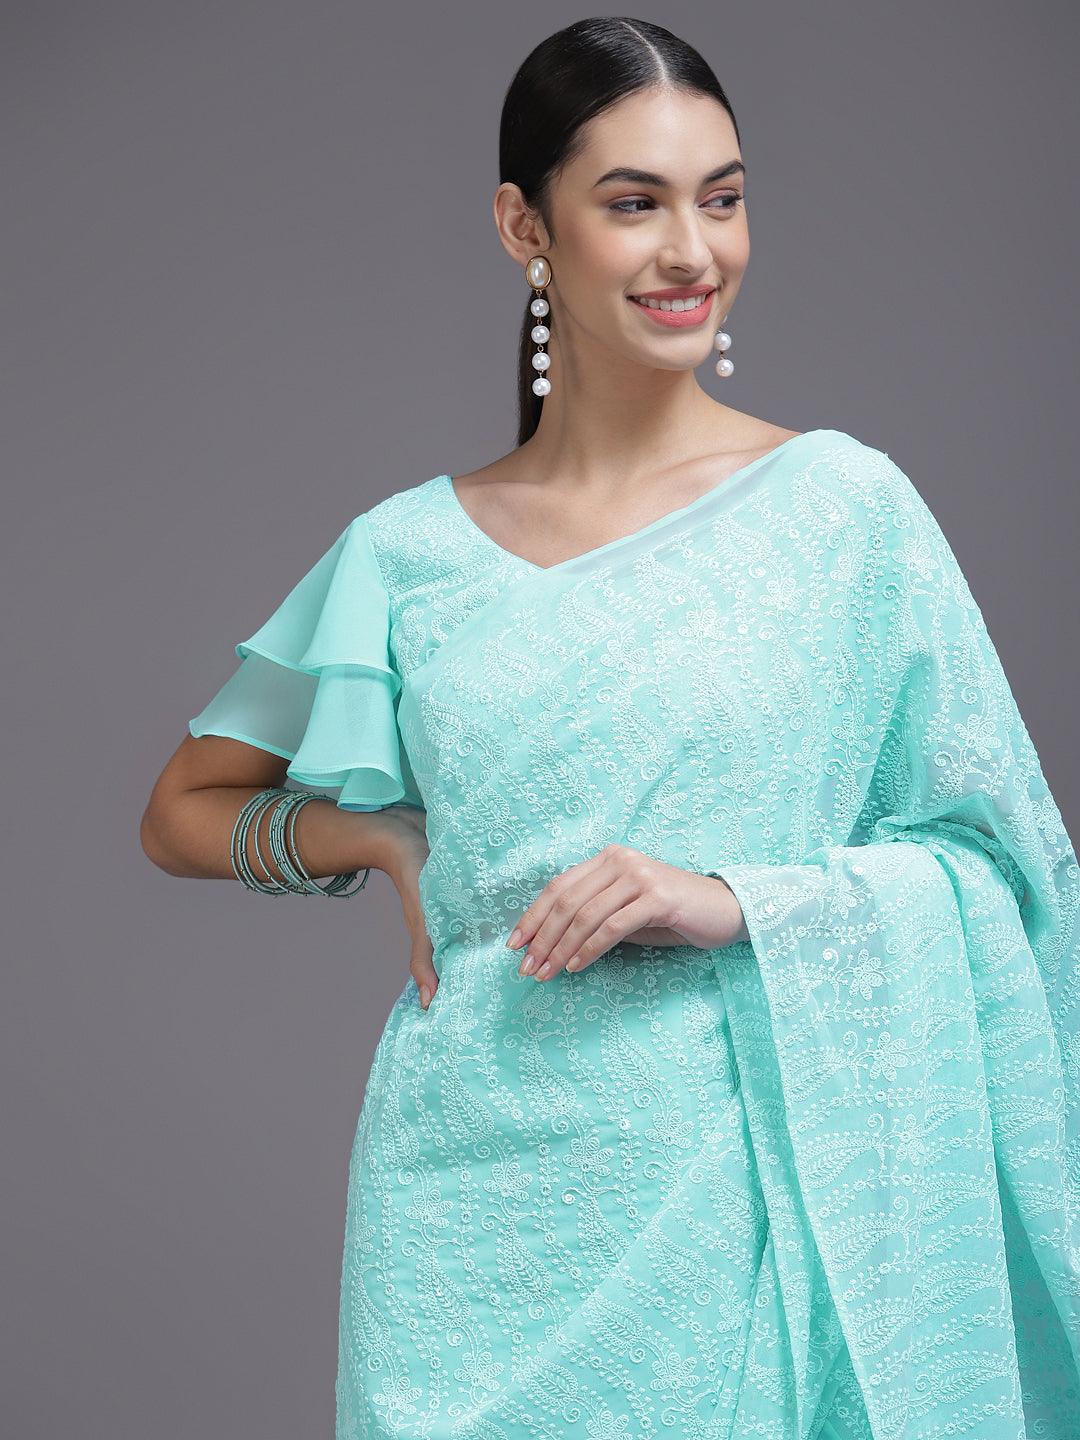 Turquoise Blue Embroidered Georgette Saree